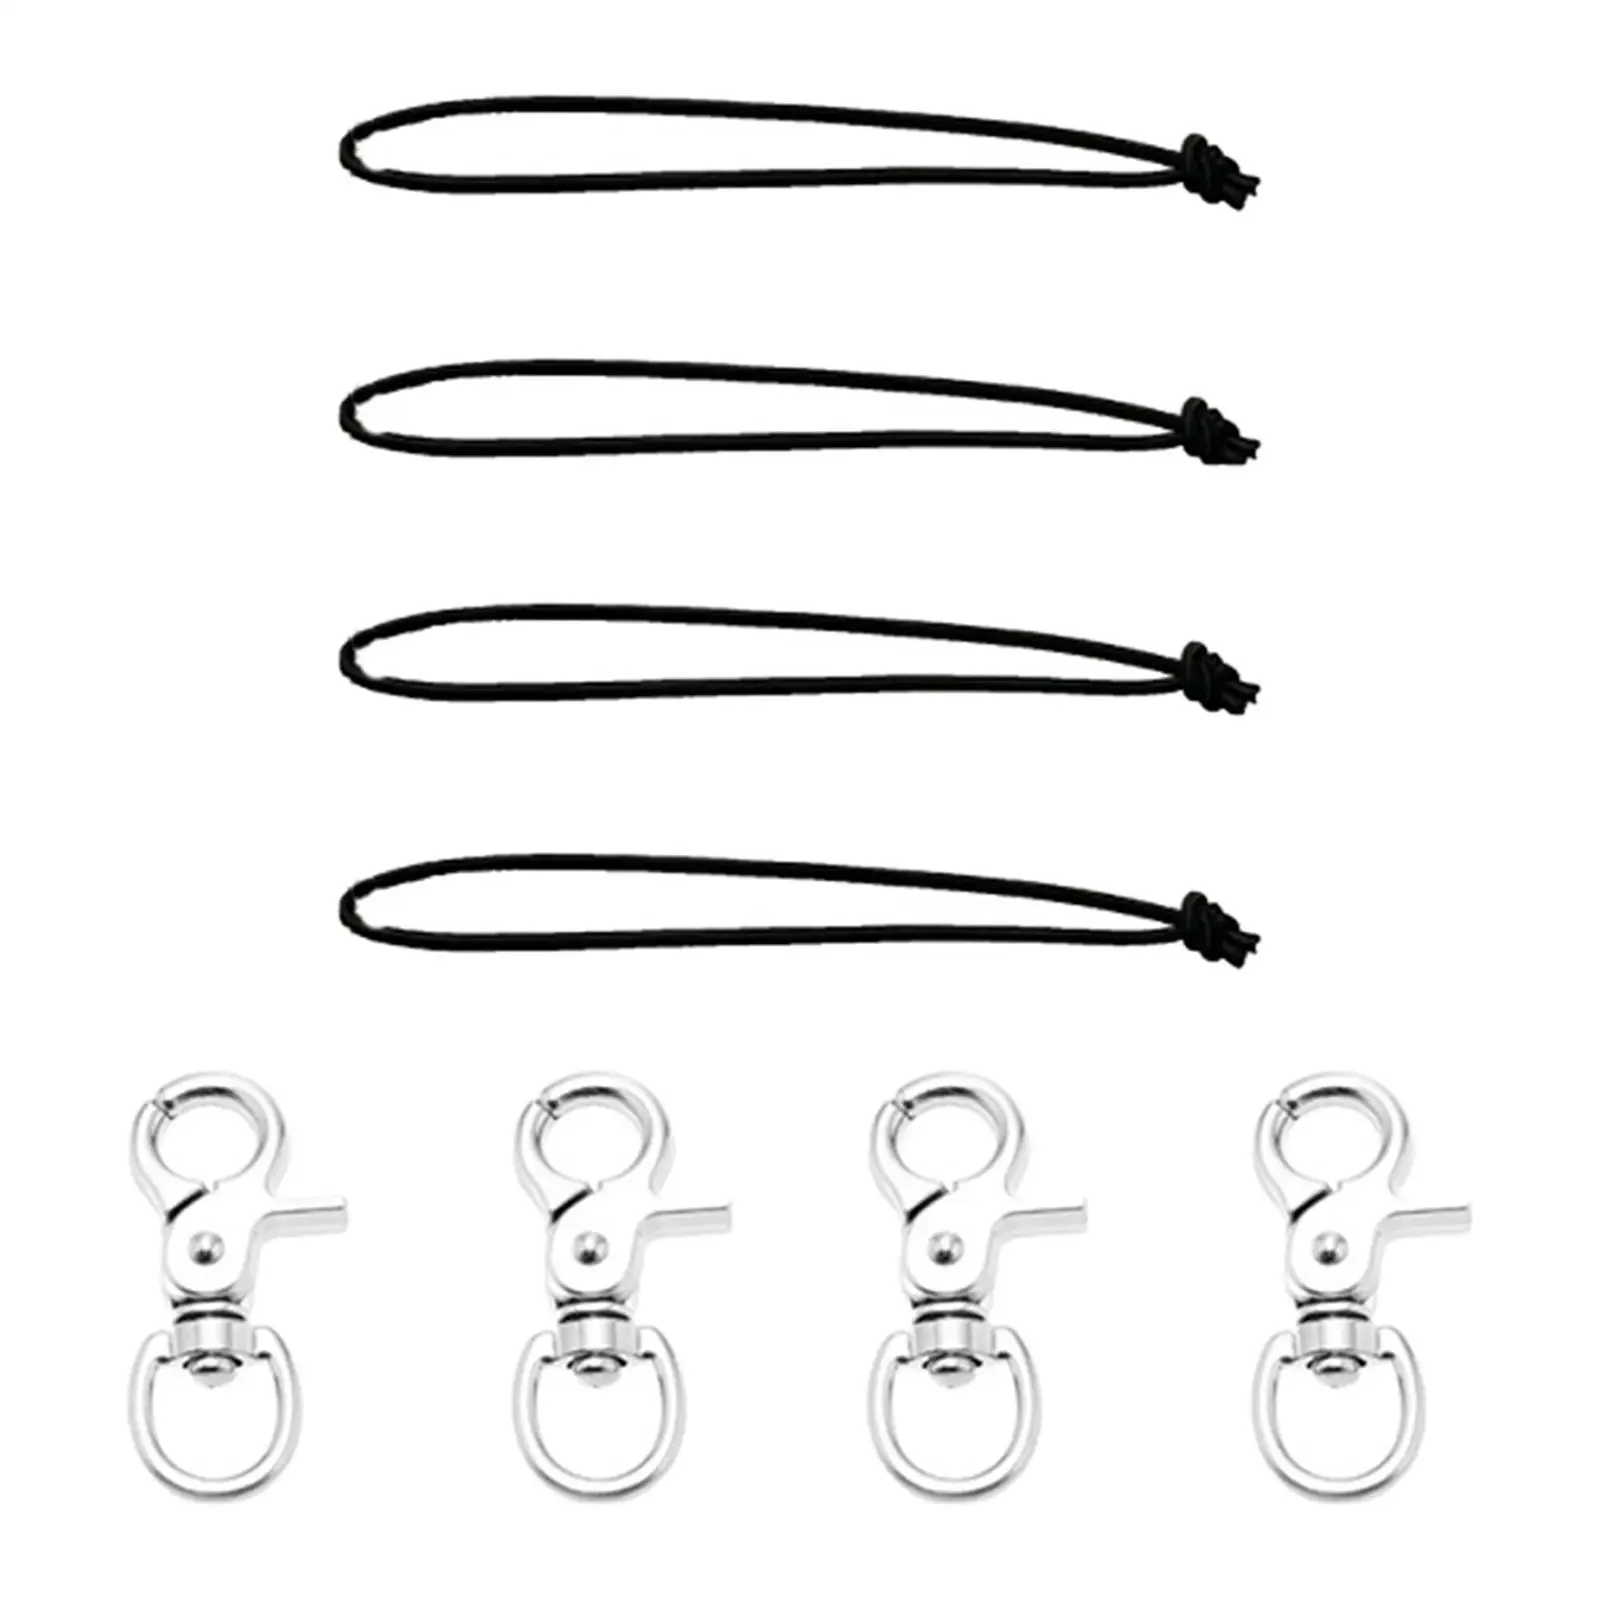 4x Skiing Snowboard Leash Cord Accessories Snowboard Bindings with Clip Strong